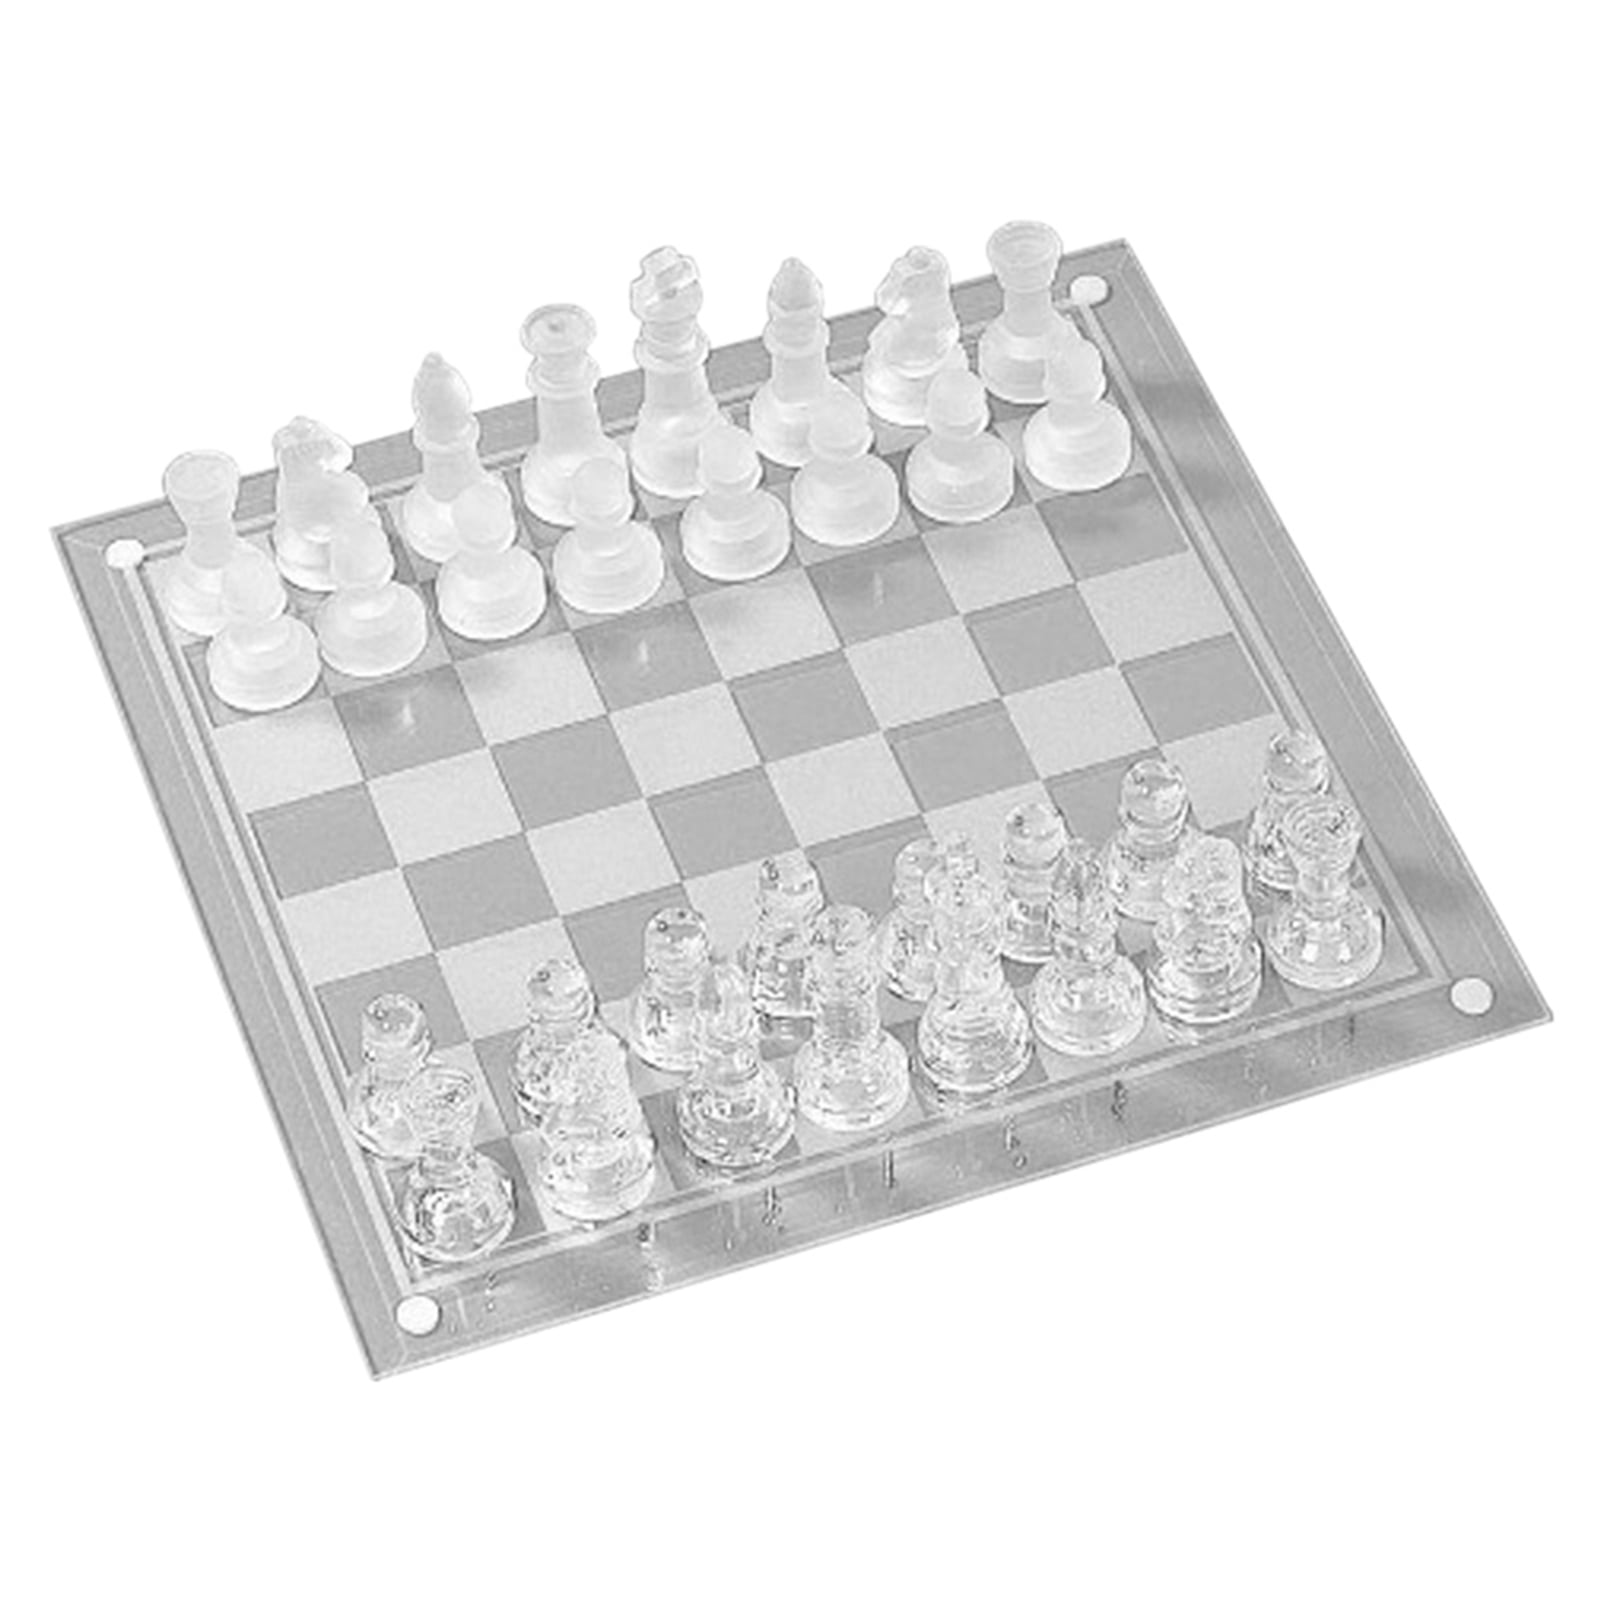 ChessBoard 32 Pieces Glass Frosted Traditional Chess Board Draughts Set Game Fun 